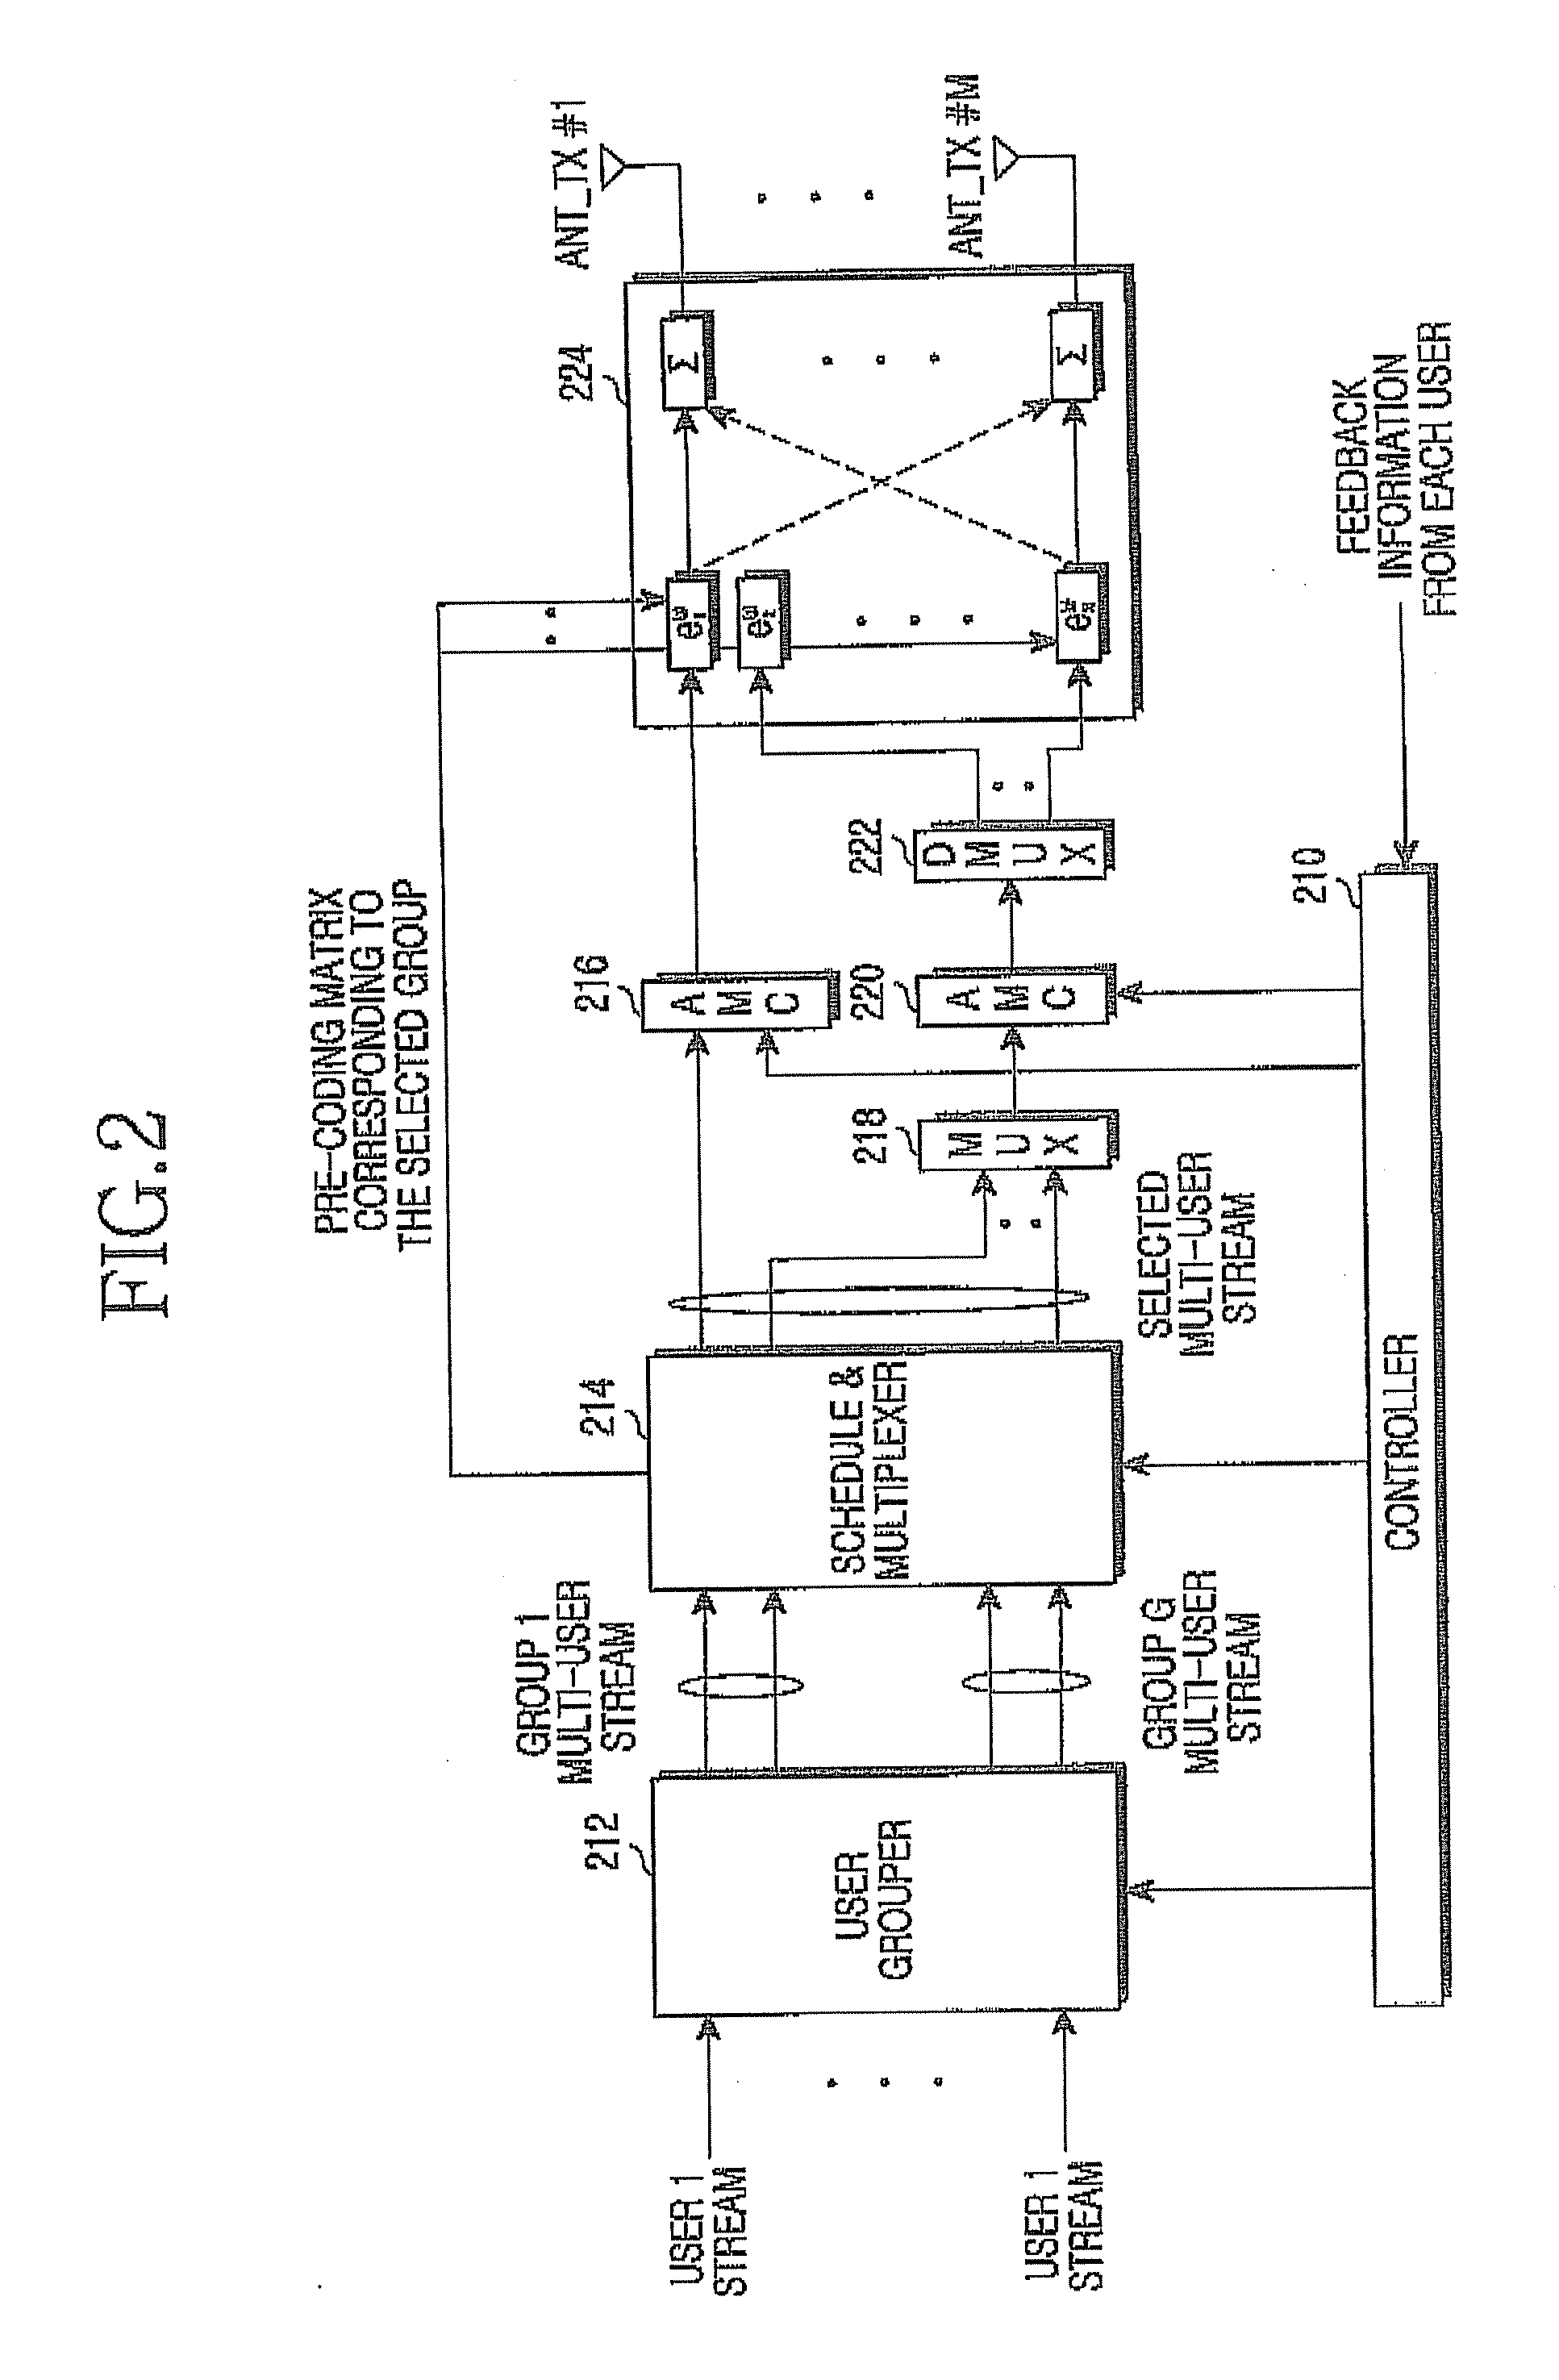 Apparatus and method for transmitting/receiving data in a closed-loop multi-antenna system